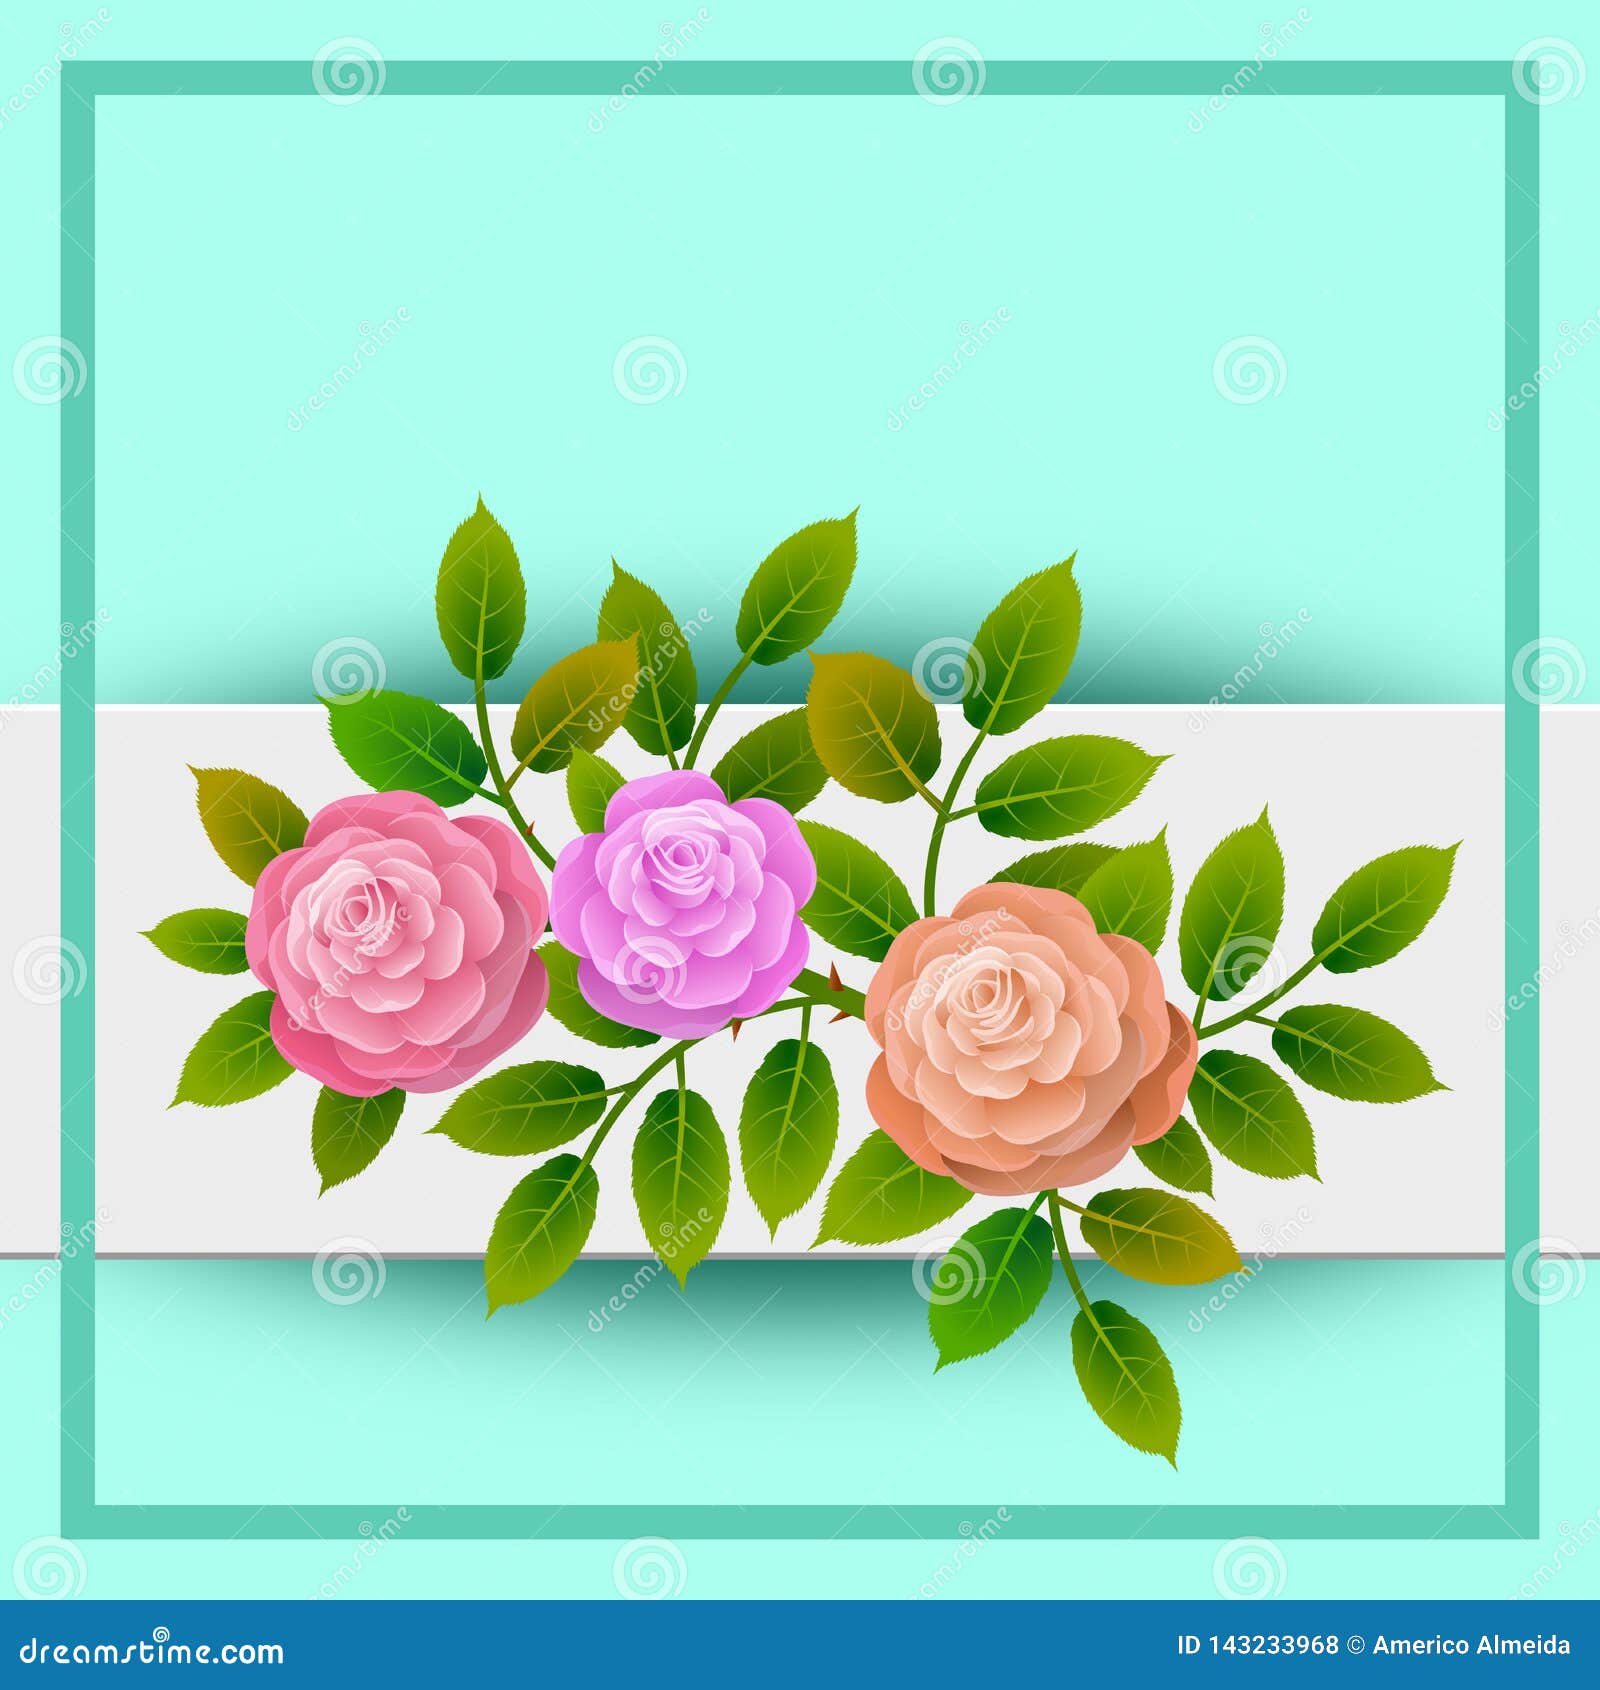 floral frame with bouquet of roses. ideal for integrating a personalized message or dedication allusive to various events or celeb